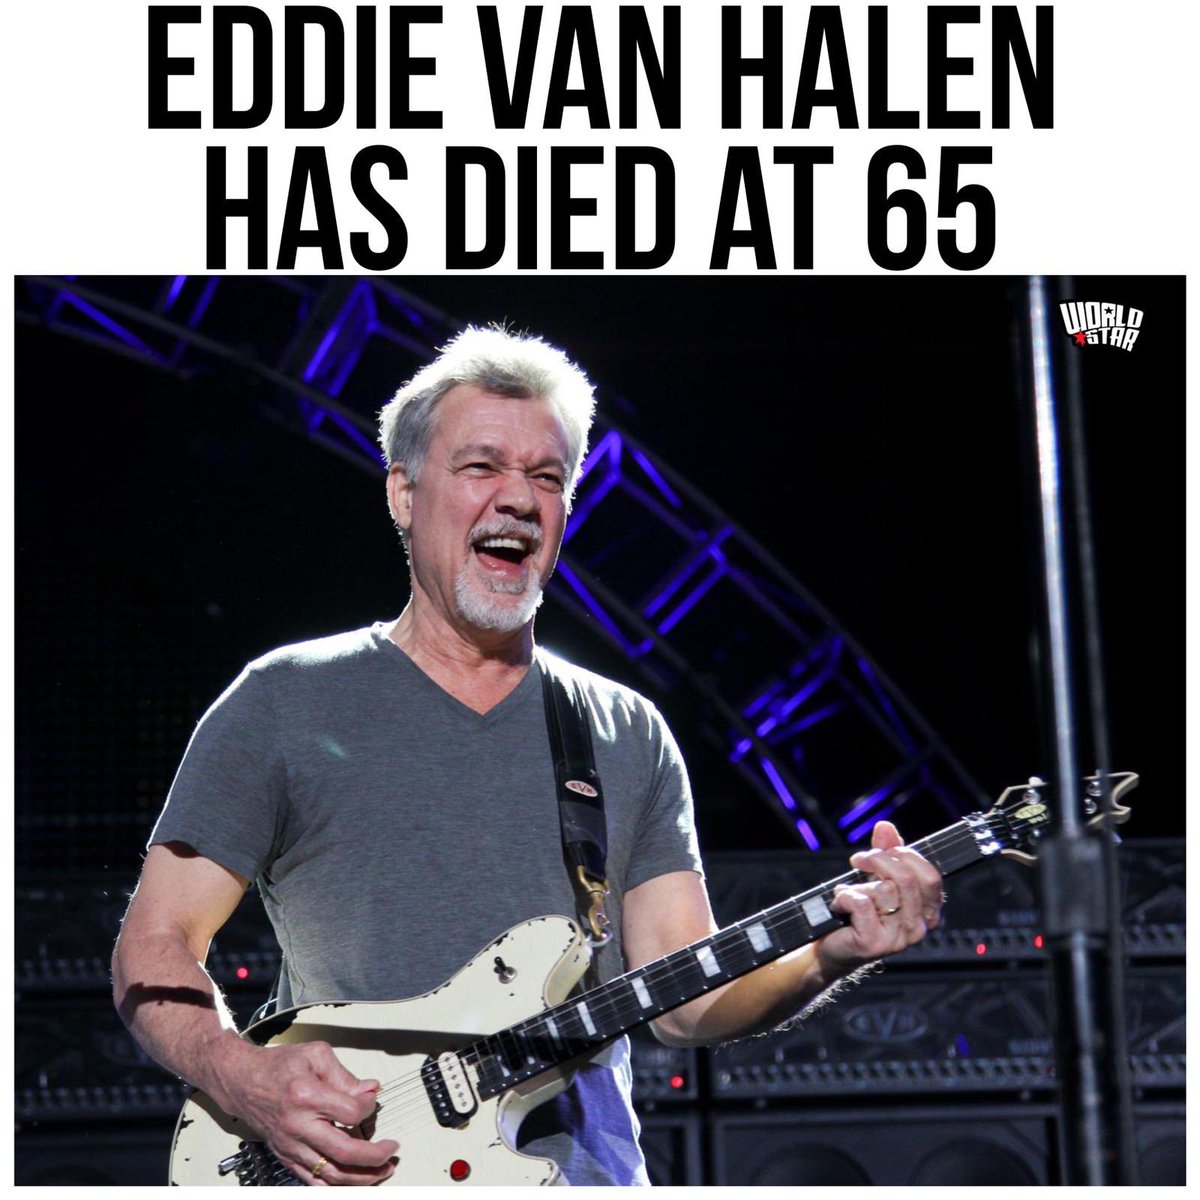 According to reports, legendary guitarist, #EddieVanHalen of the band Van Halen, has passed away at the age of 65 following a battle with throat cancer. Our thoughts and prayers go out to his family and friends. 🙏 #RIPEddieVanHalen